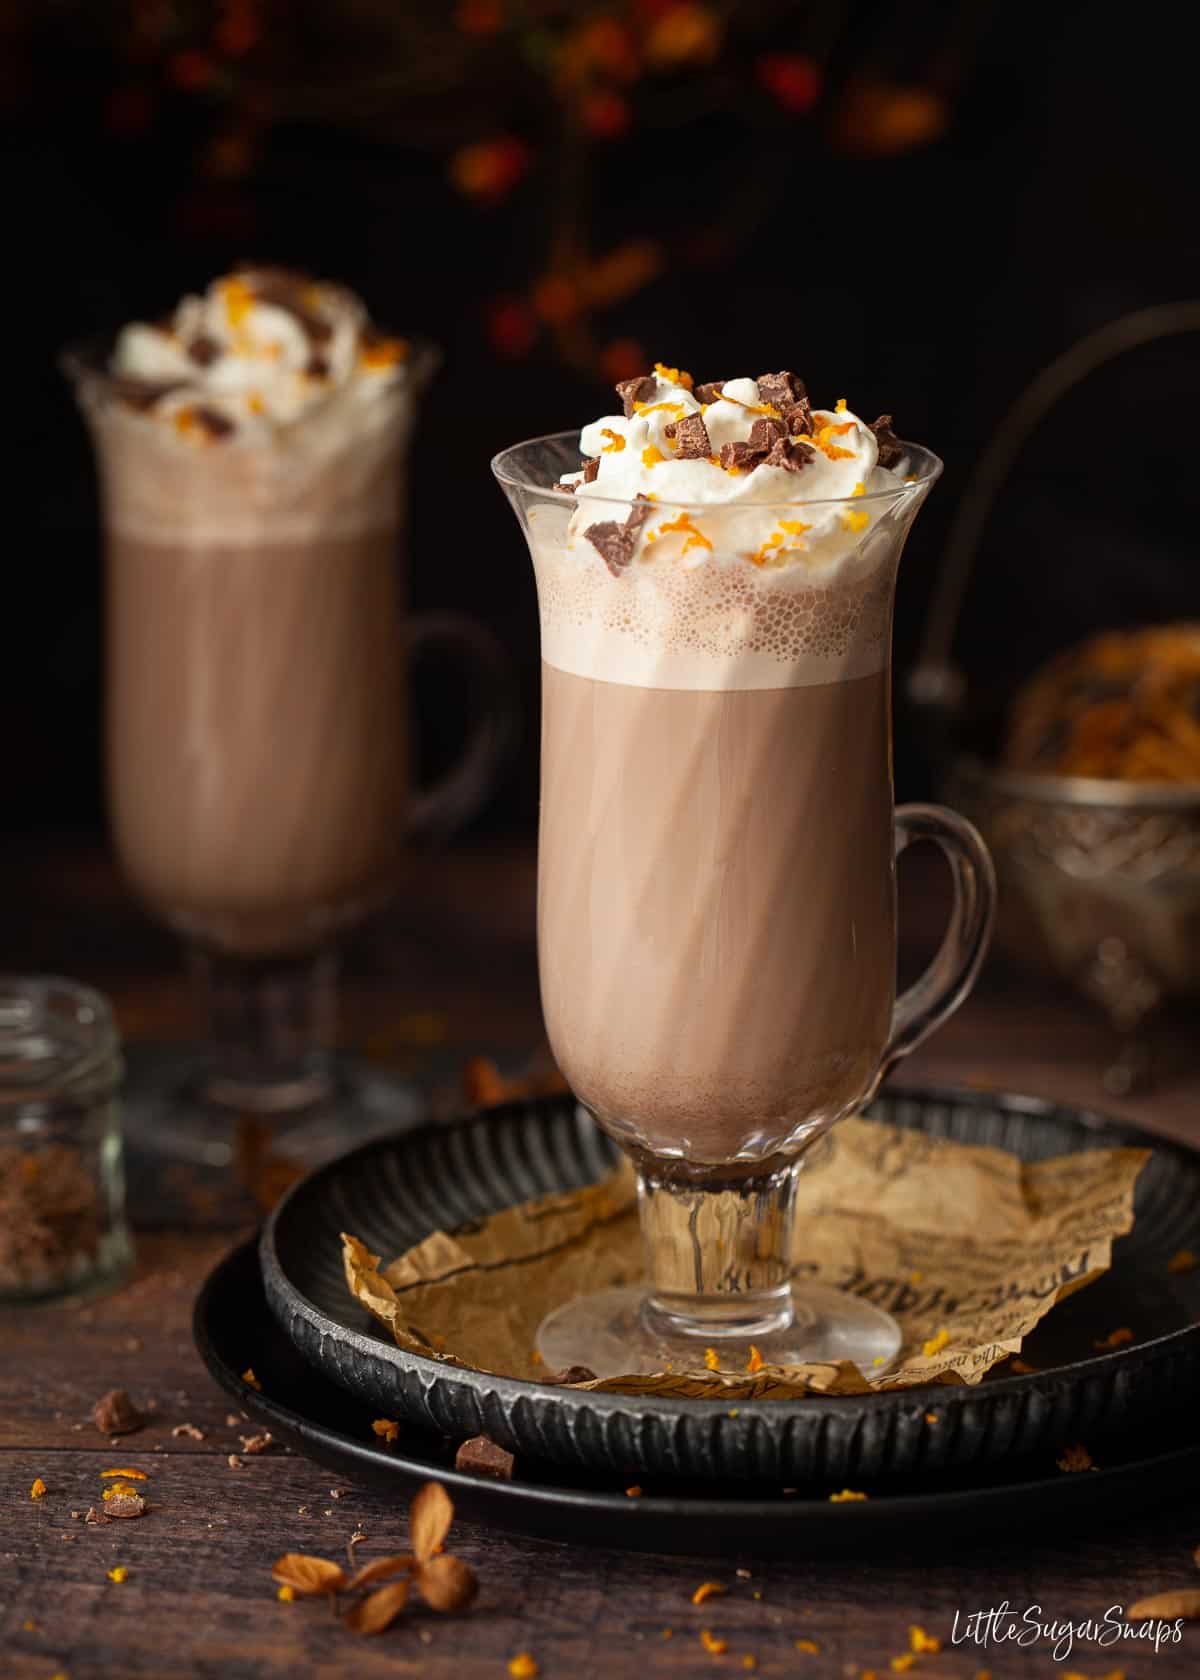 Hot chocolate orange drink with whipped cream, orange zest and grated chocolate.